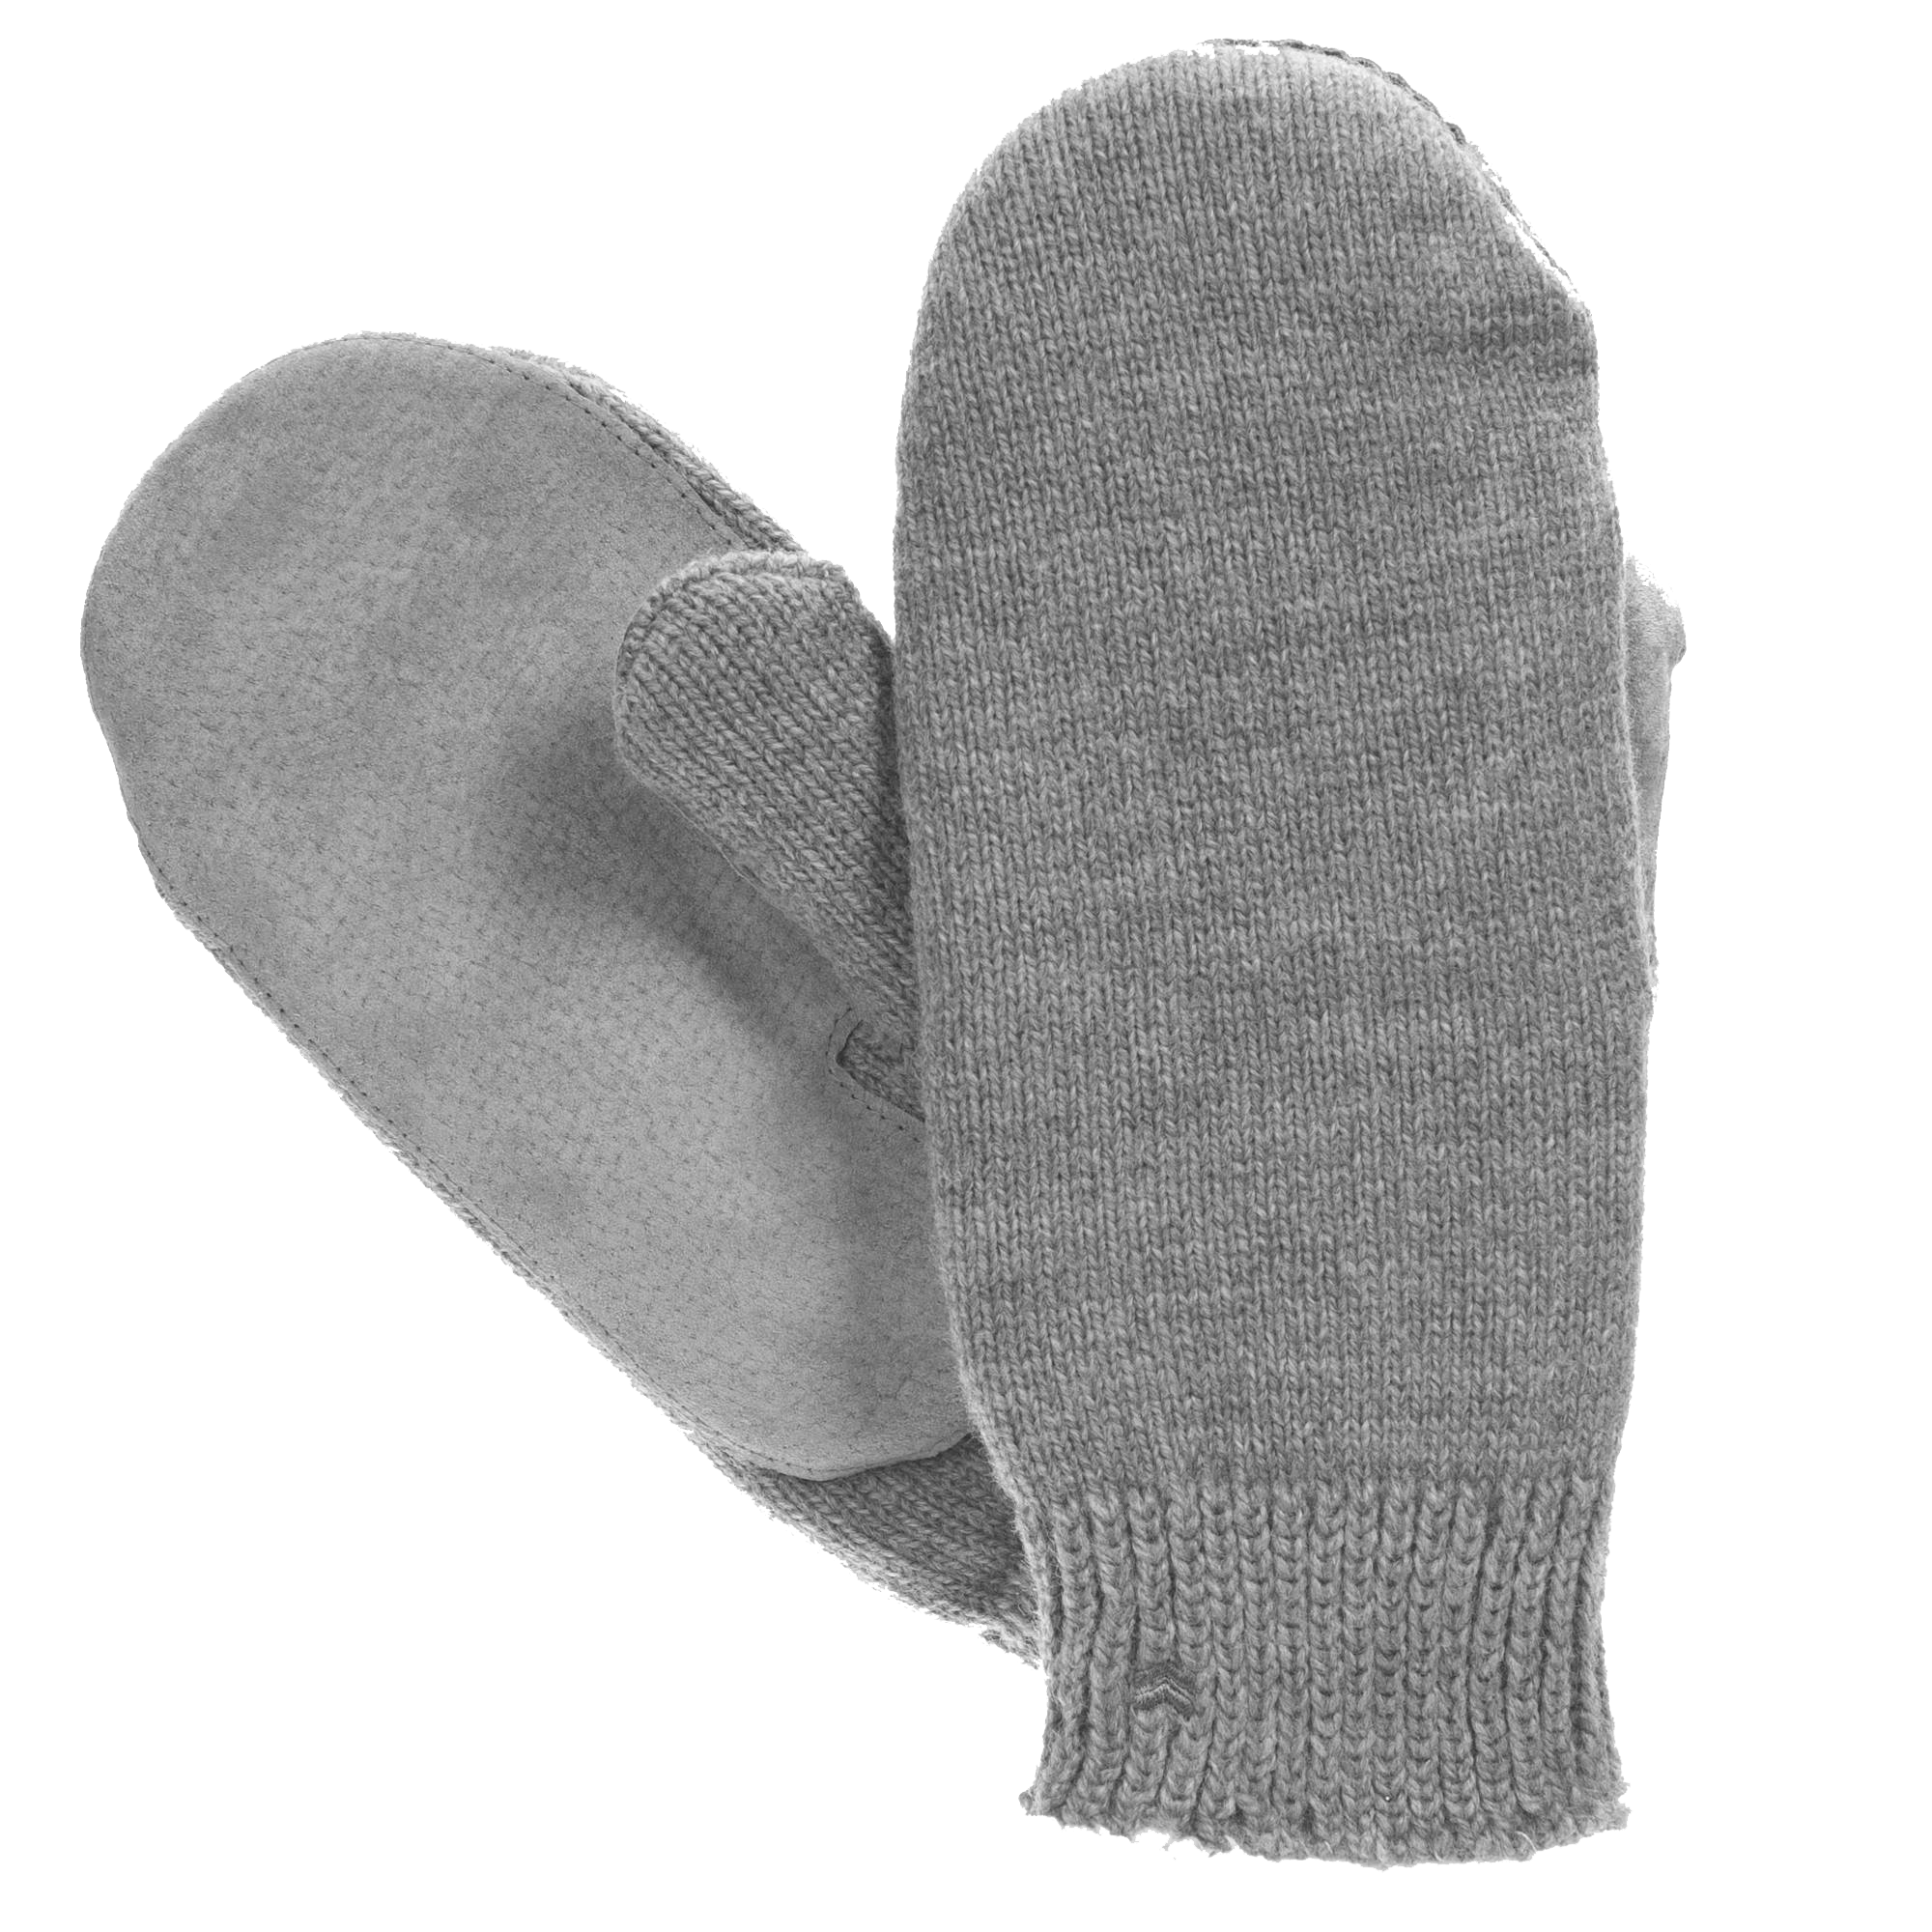 Isotoner Women’s Classic Knit Mittens - SherpaSoft Lined